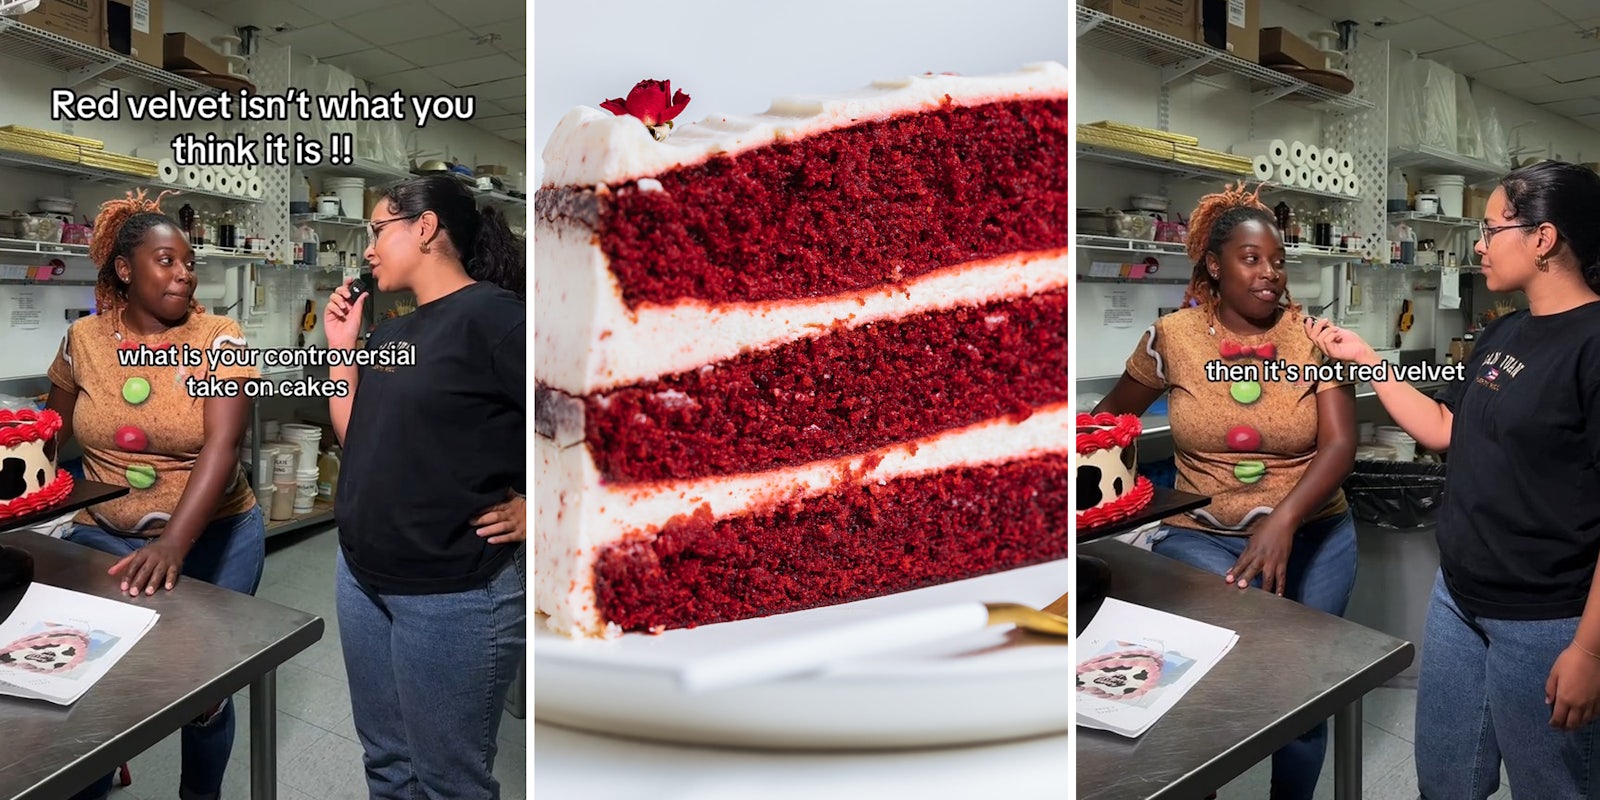 woman asking baker 'what is your controversial take on cakes' with caption 'Red velvet isn't what you think it is!!' (l) red velvet cake (c) baker with caption 'then it's not red velvet' (r)